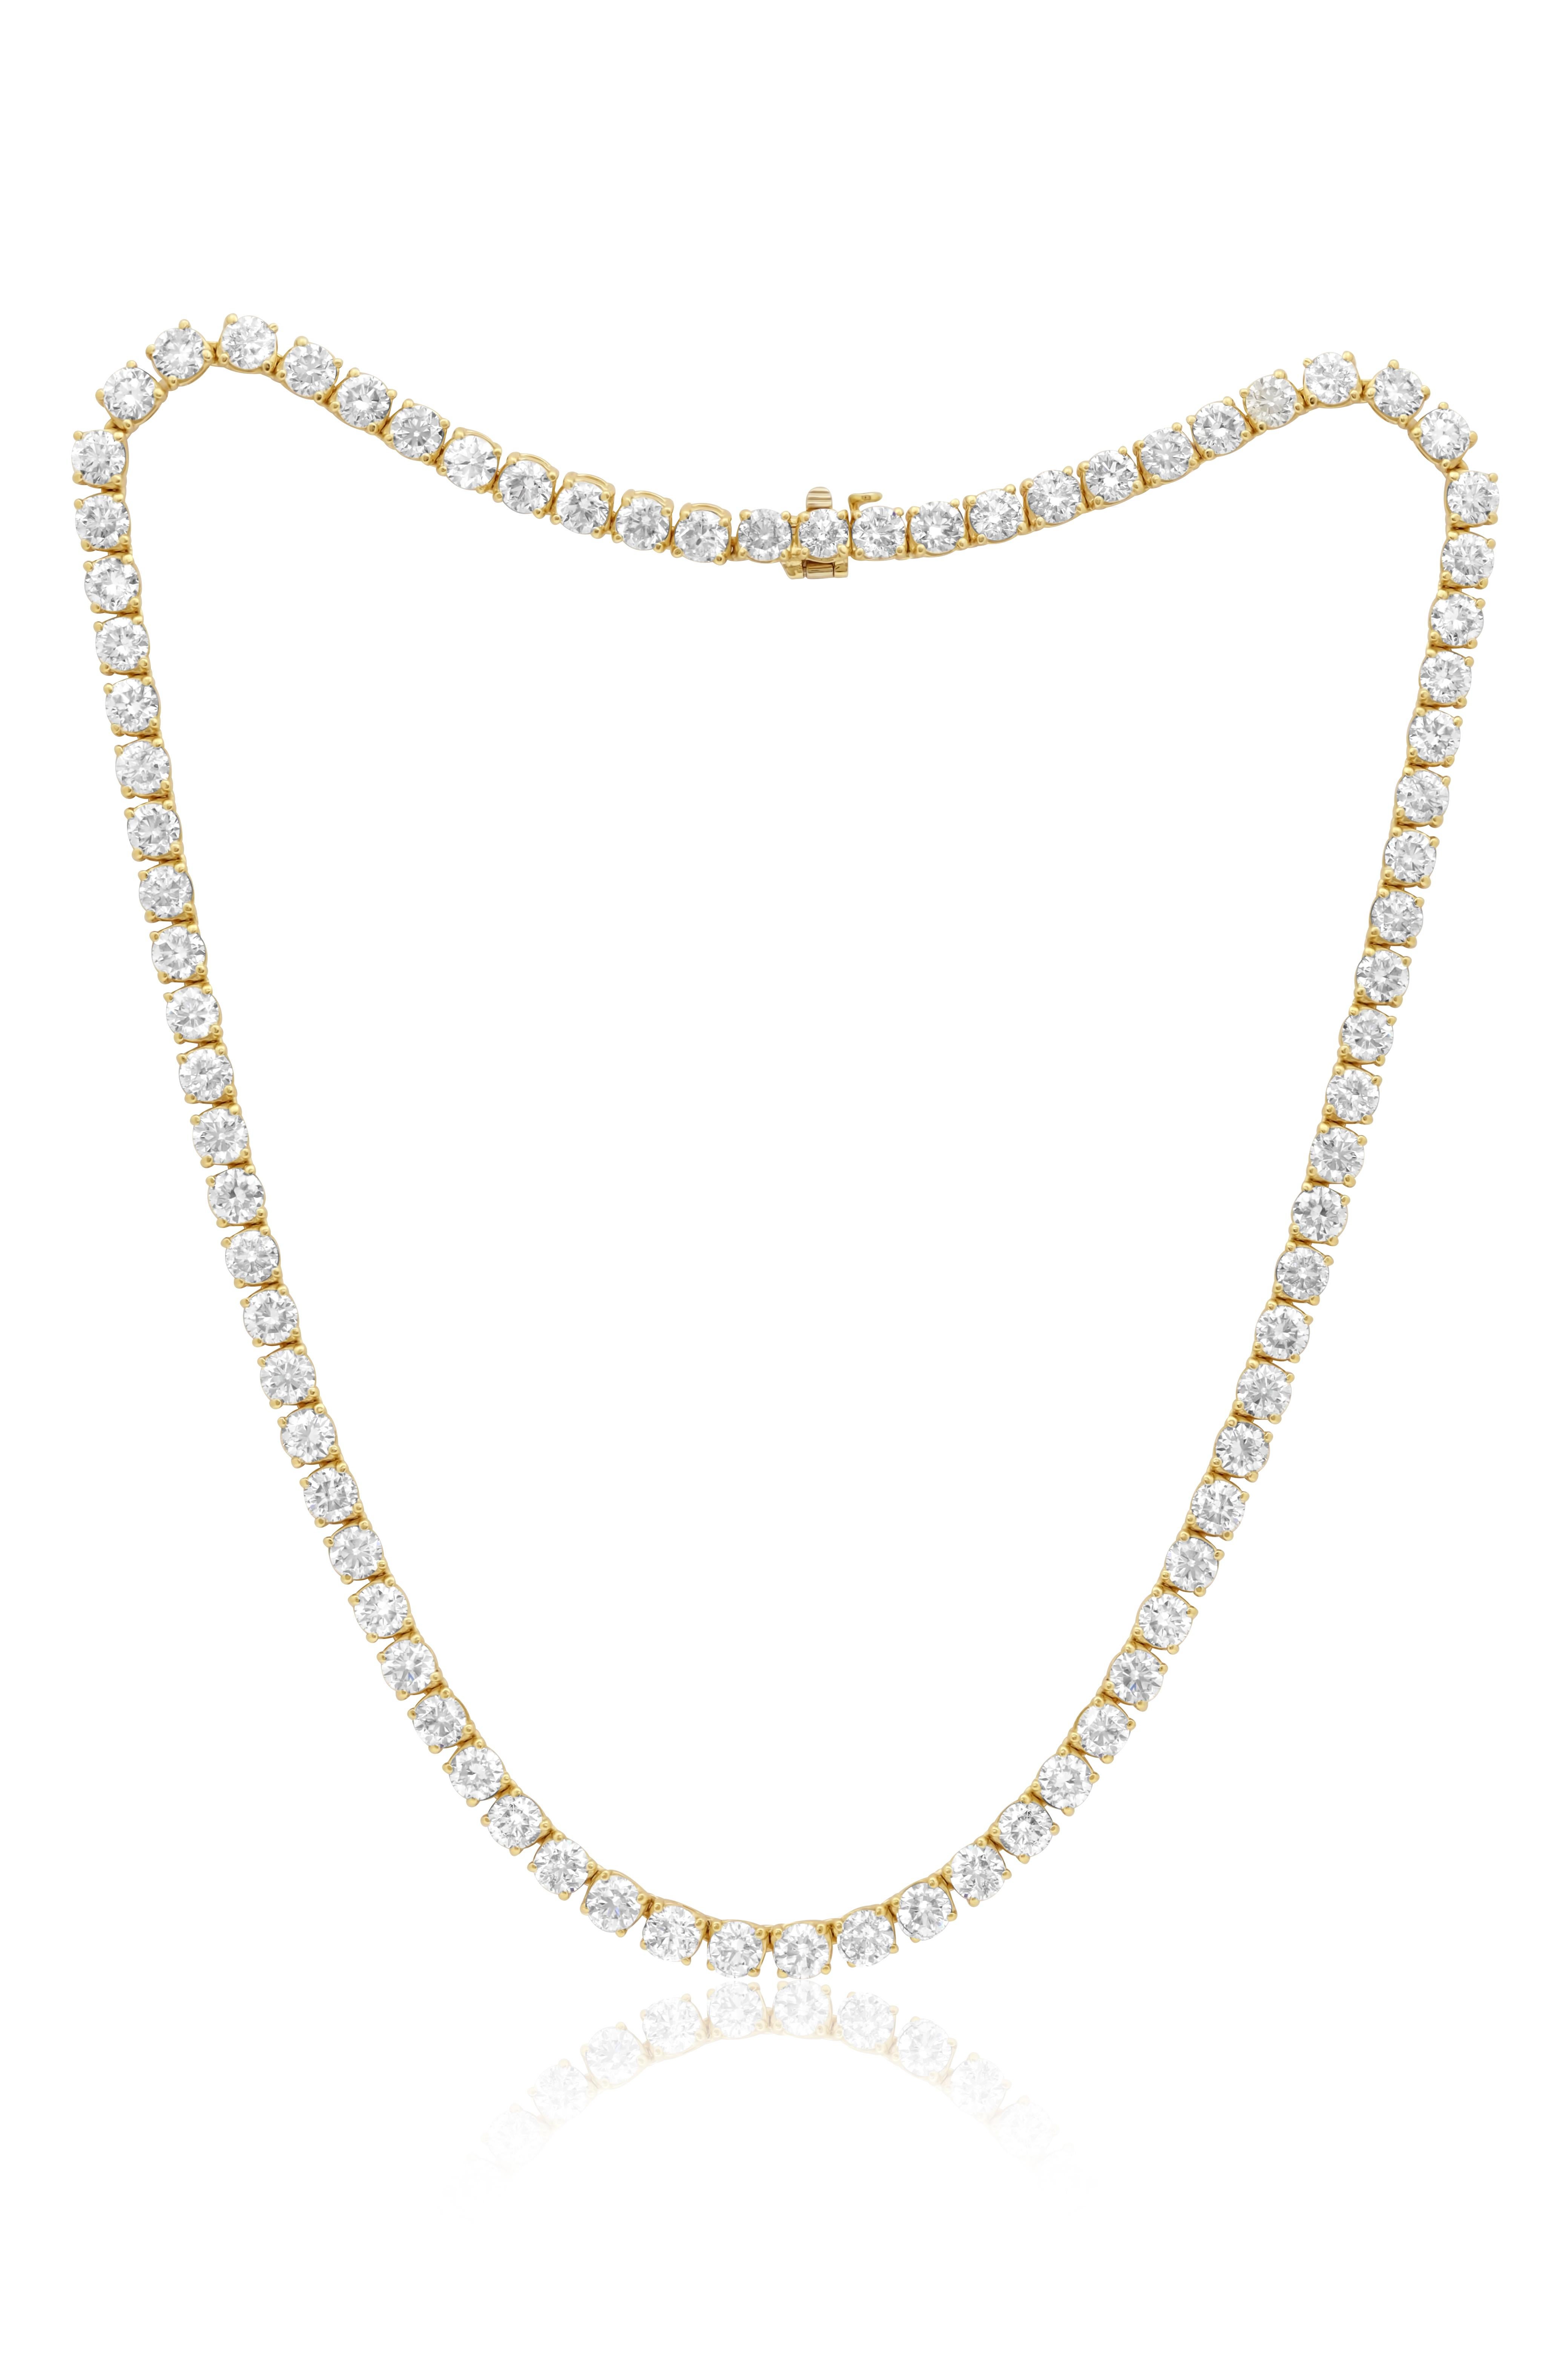 Round Cut Diana M. Custom 14.05 cts Round 4 Prong Diamond 14k Yellow Gold Tennis Necklace  For Sale